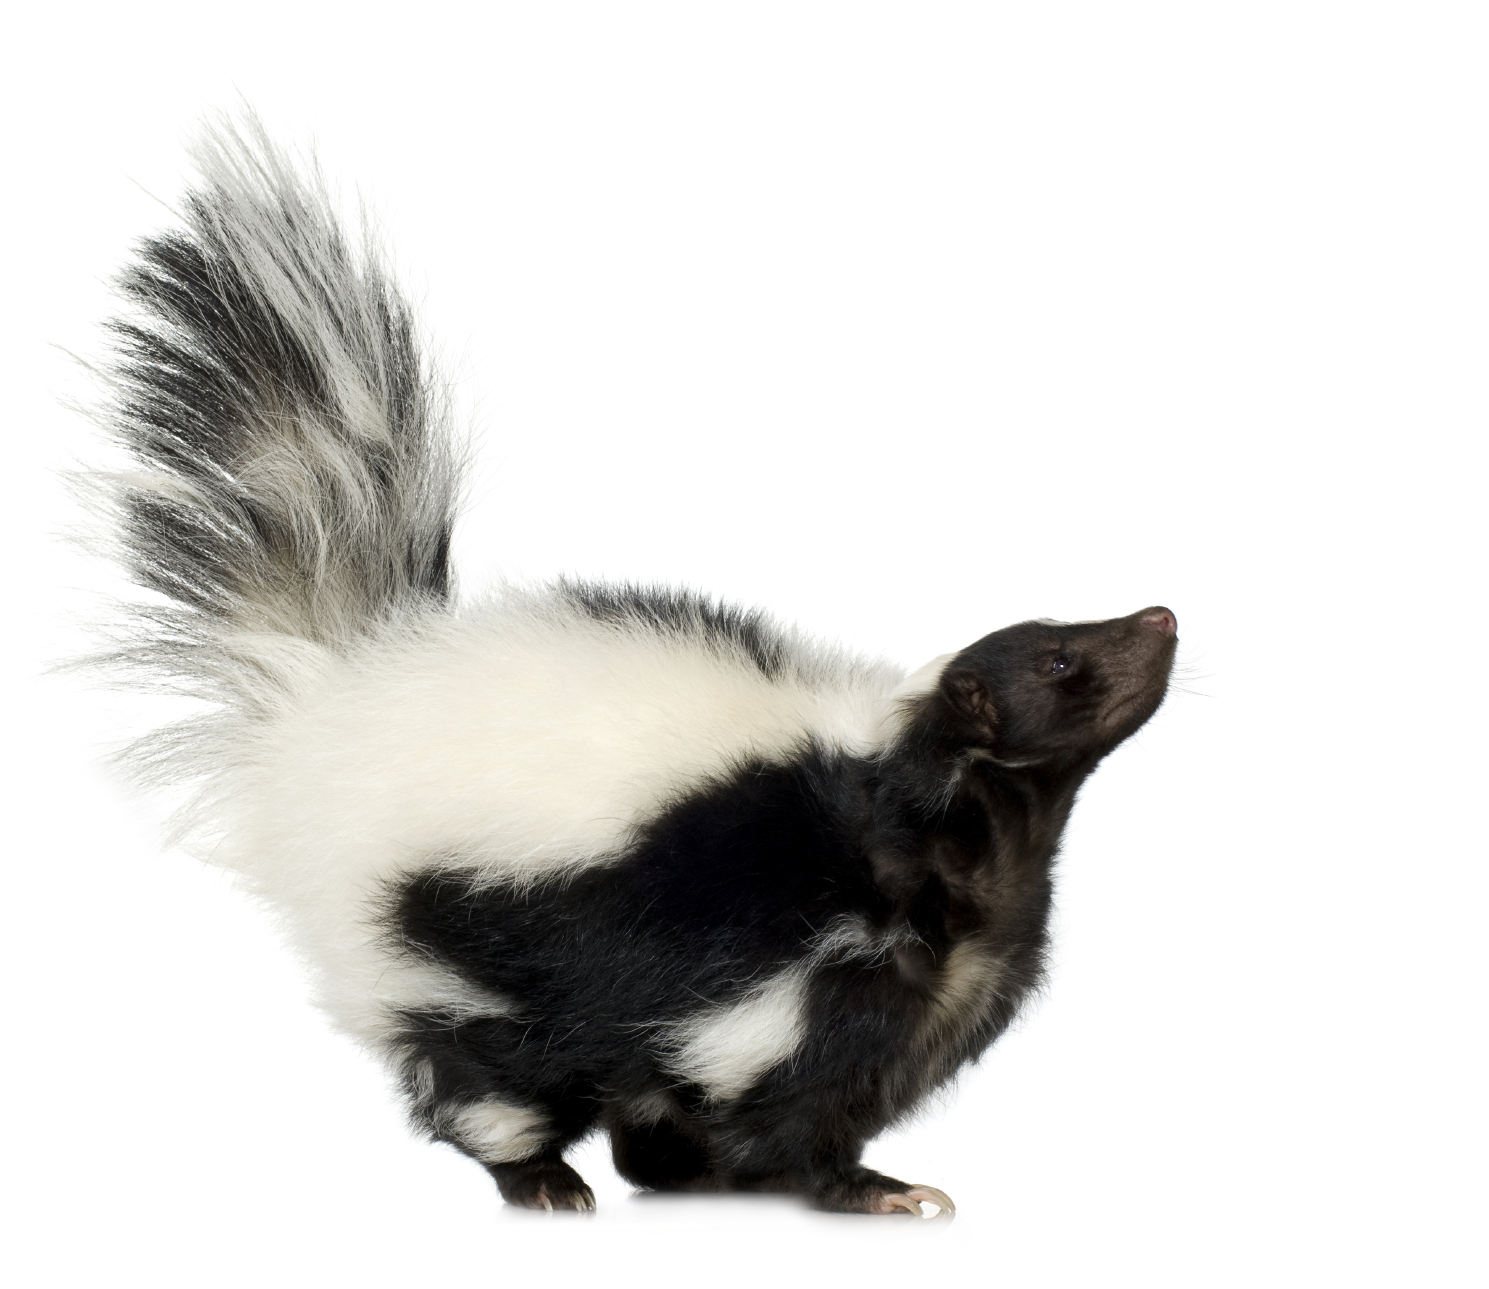 Jpg 1489x1289 Skunk With Transparent Bac #26239.